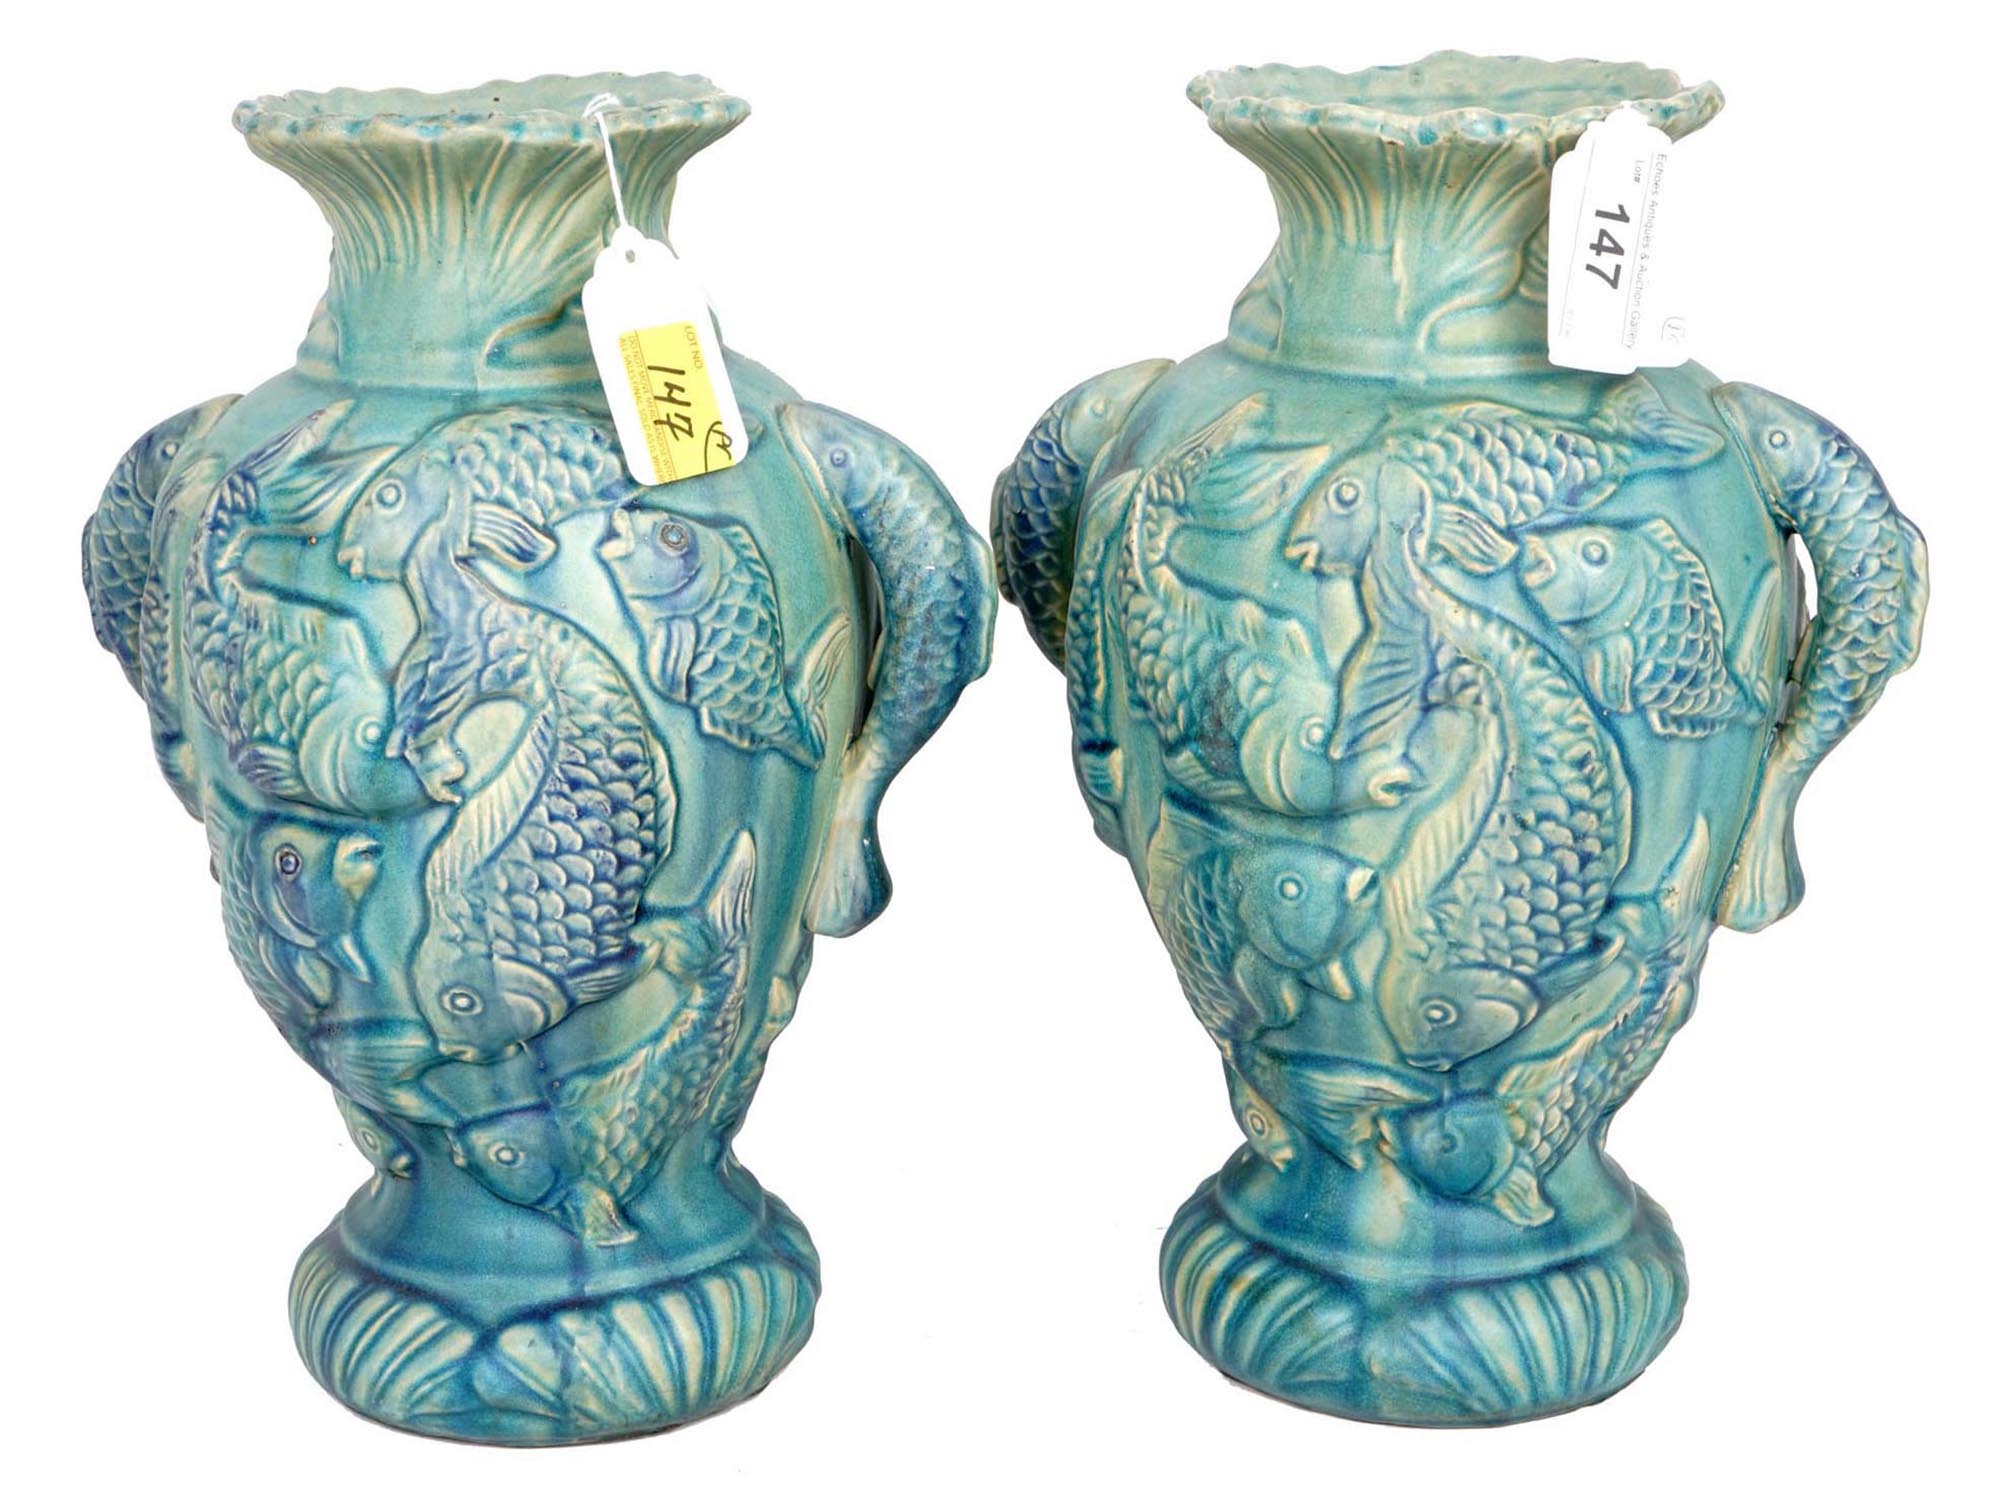 TWO LARGE JAPANESE CERAMIC VASES WITH FISH RELIEF PIC-0